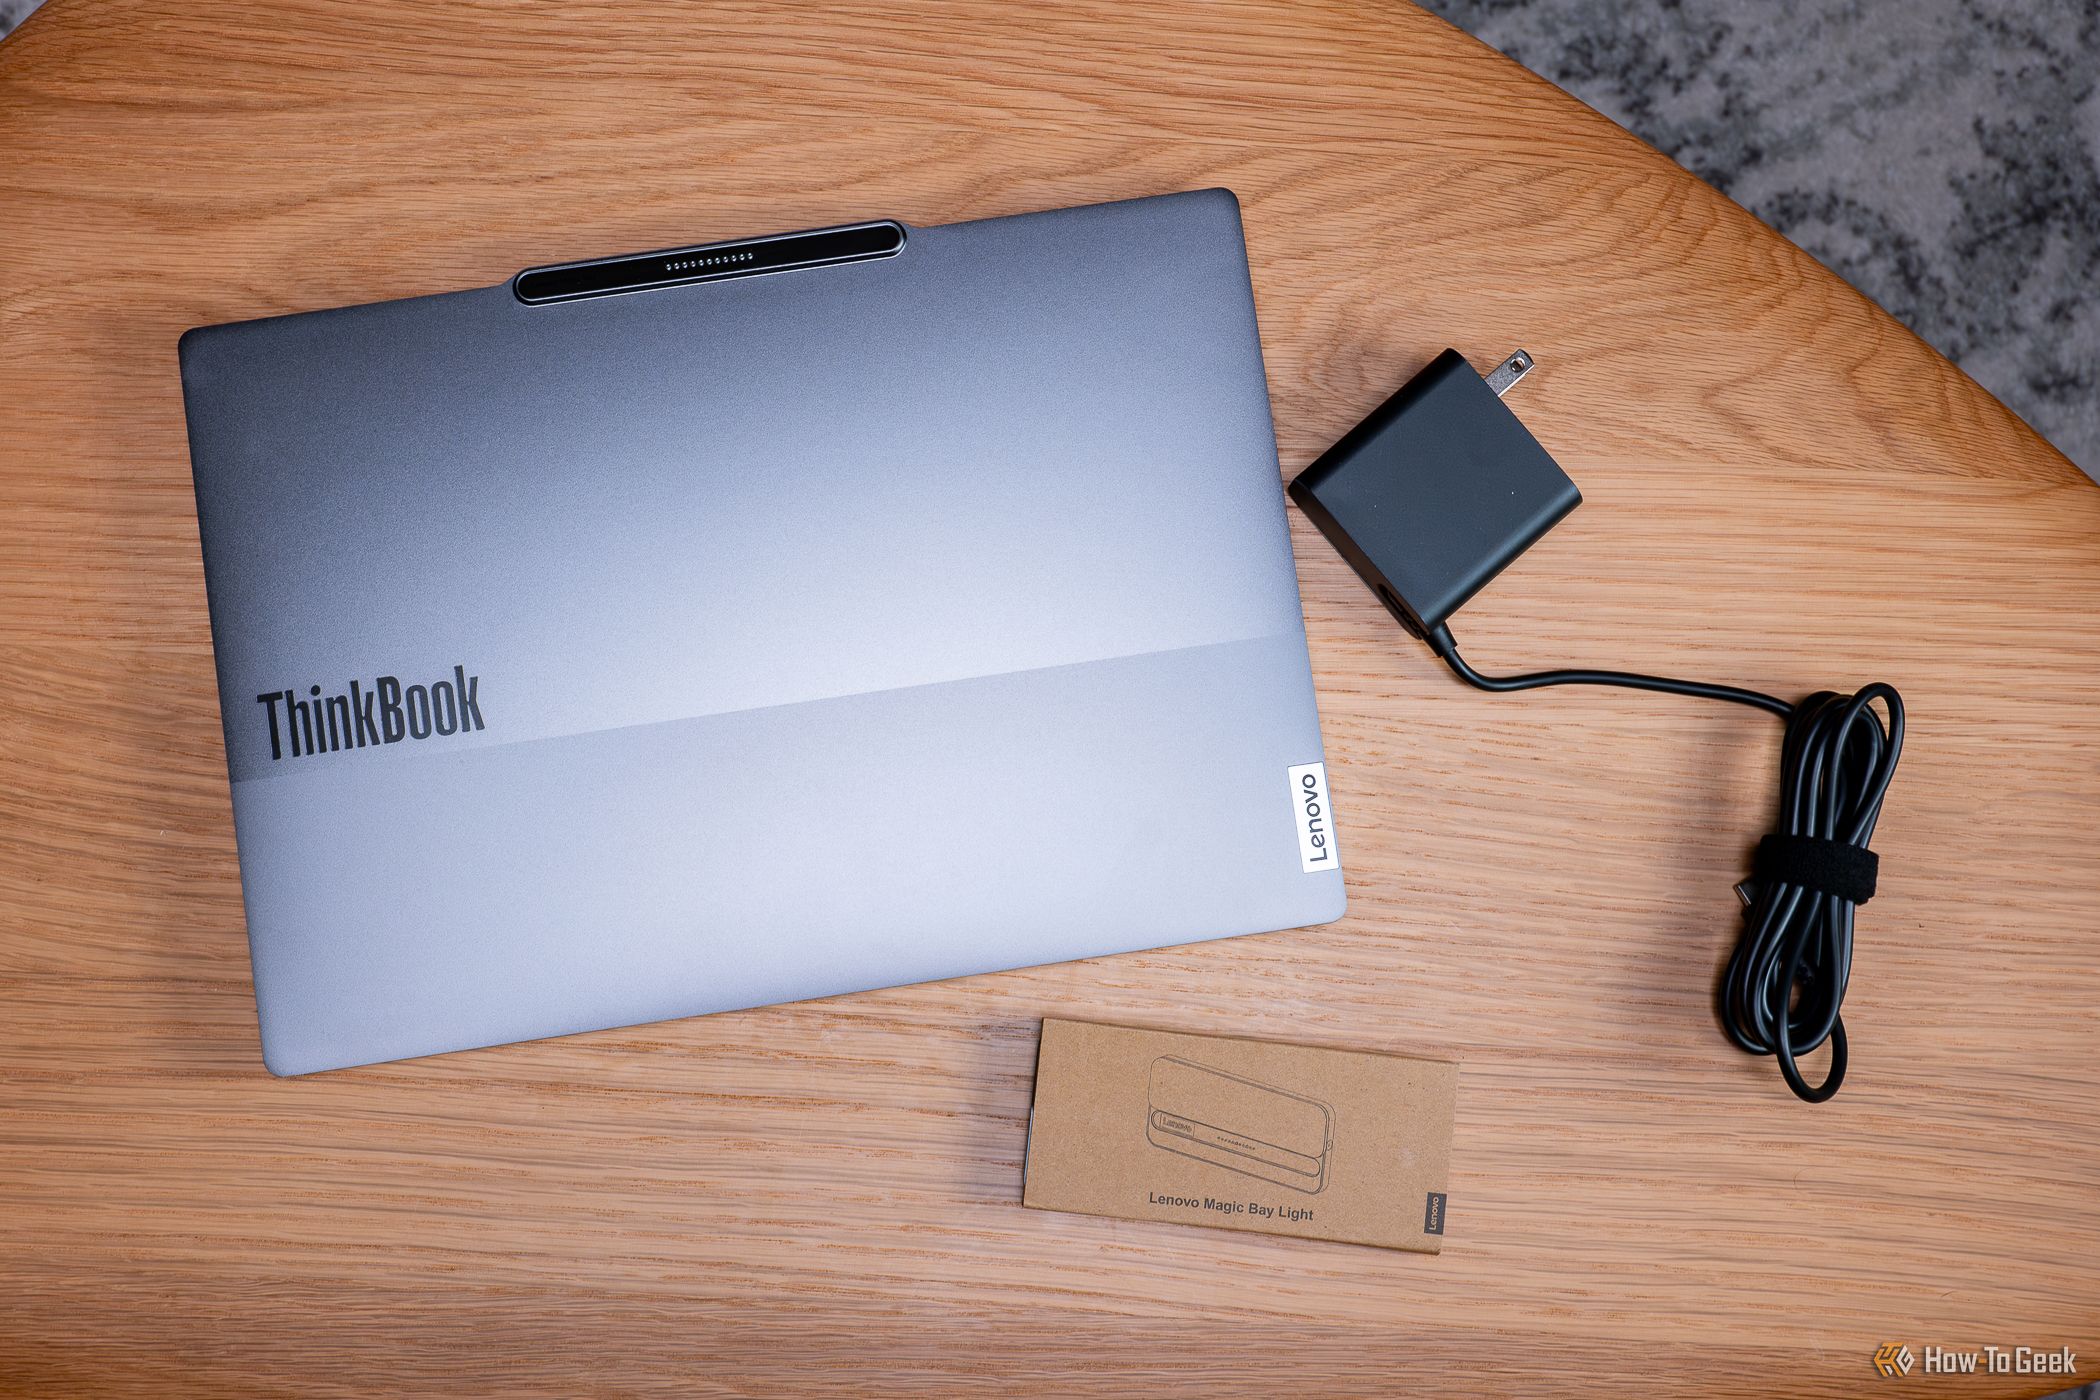 The Lenovo ThinkBook 13x Gen 4 with light and charging cable.